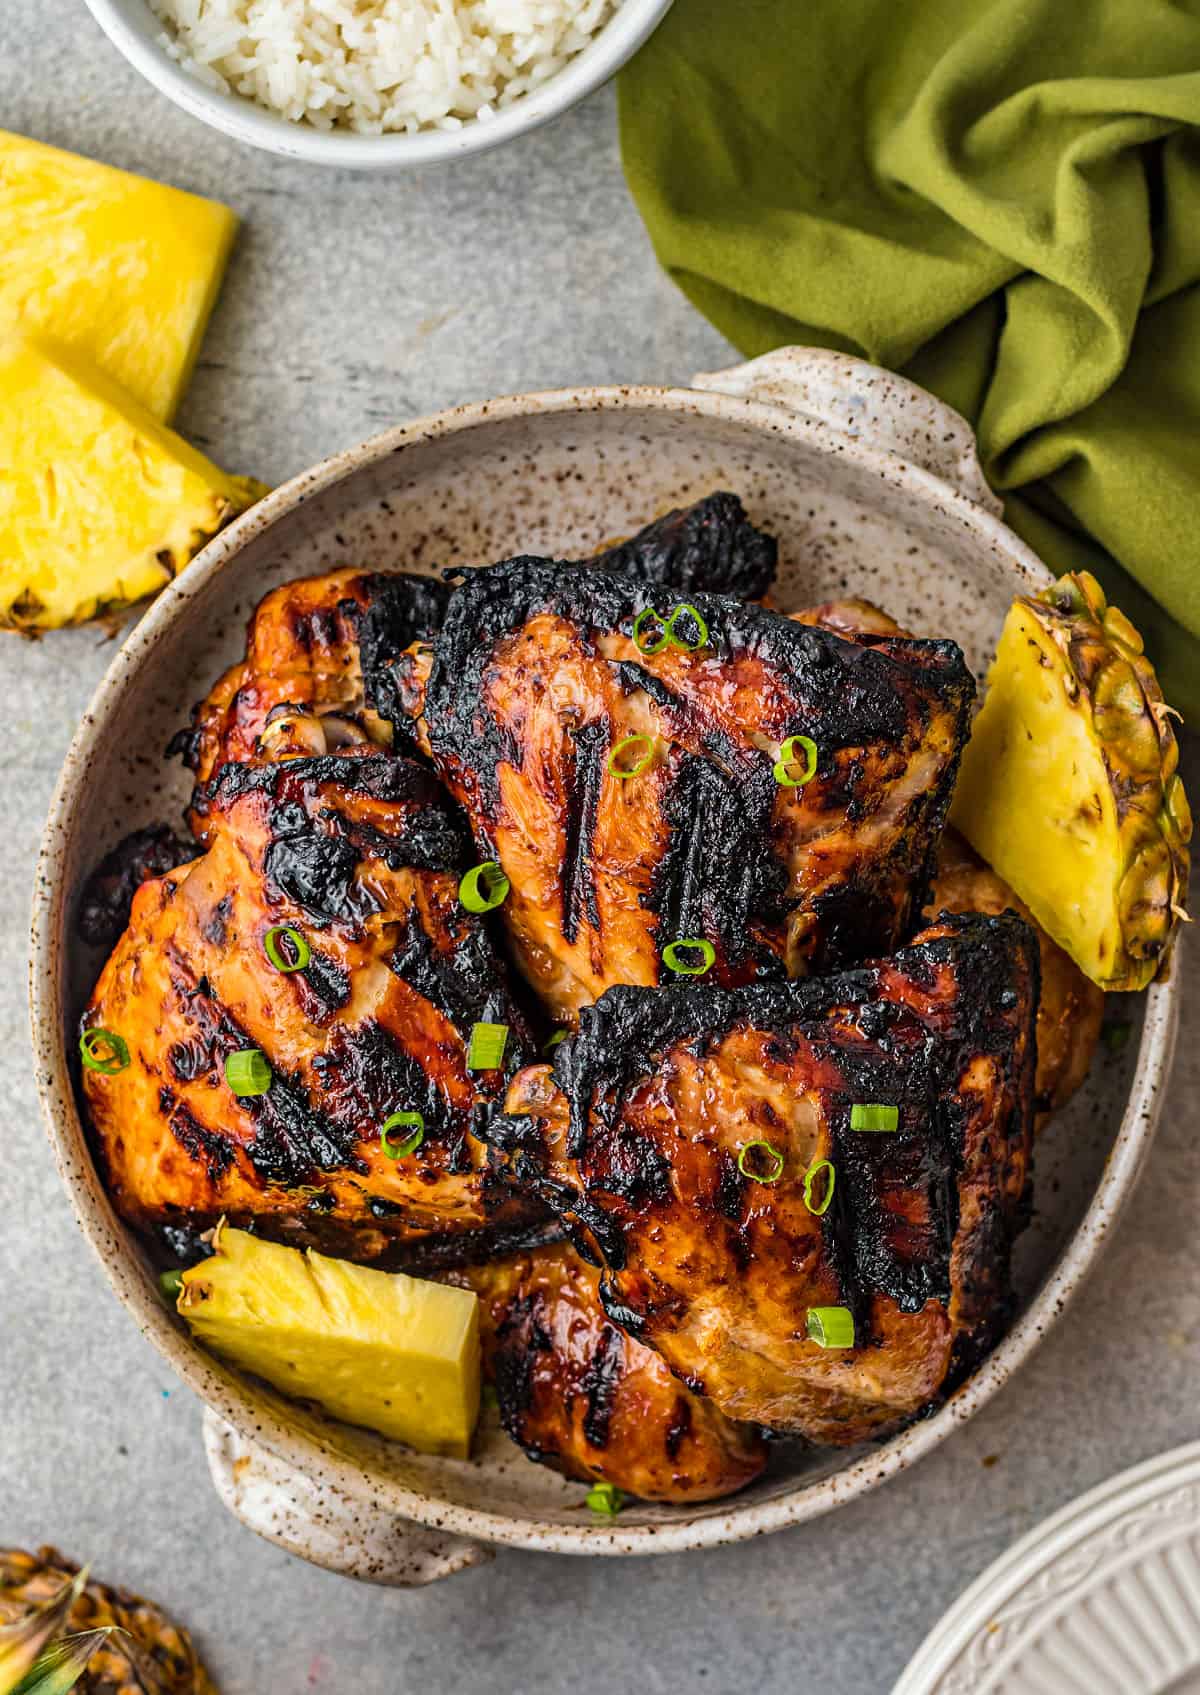 Grilled huli huli chicken in a serving bowl with sliced pineapple.